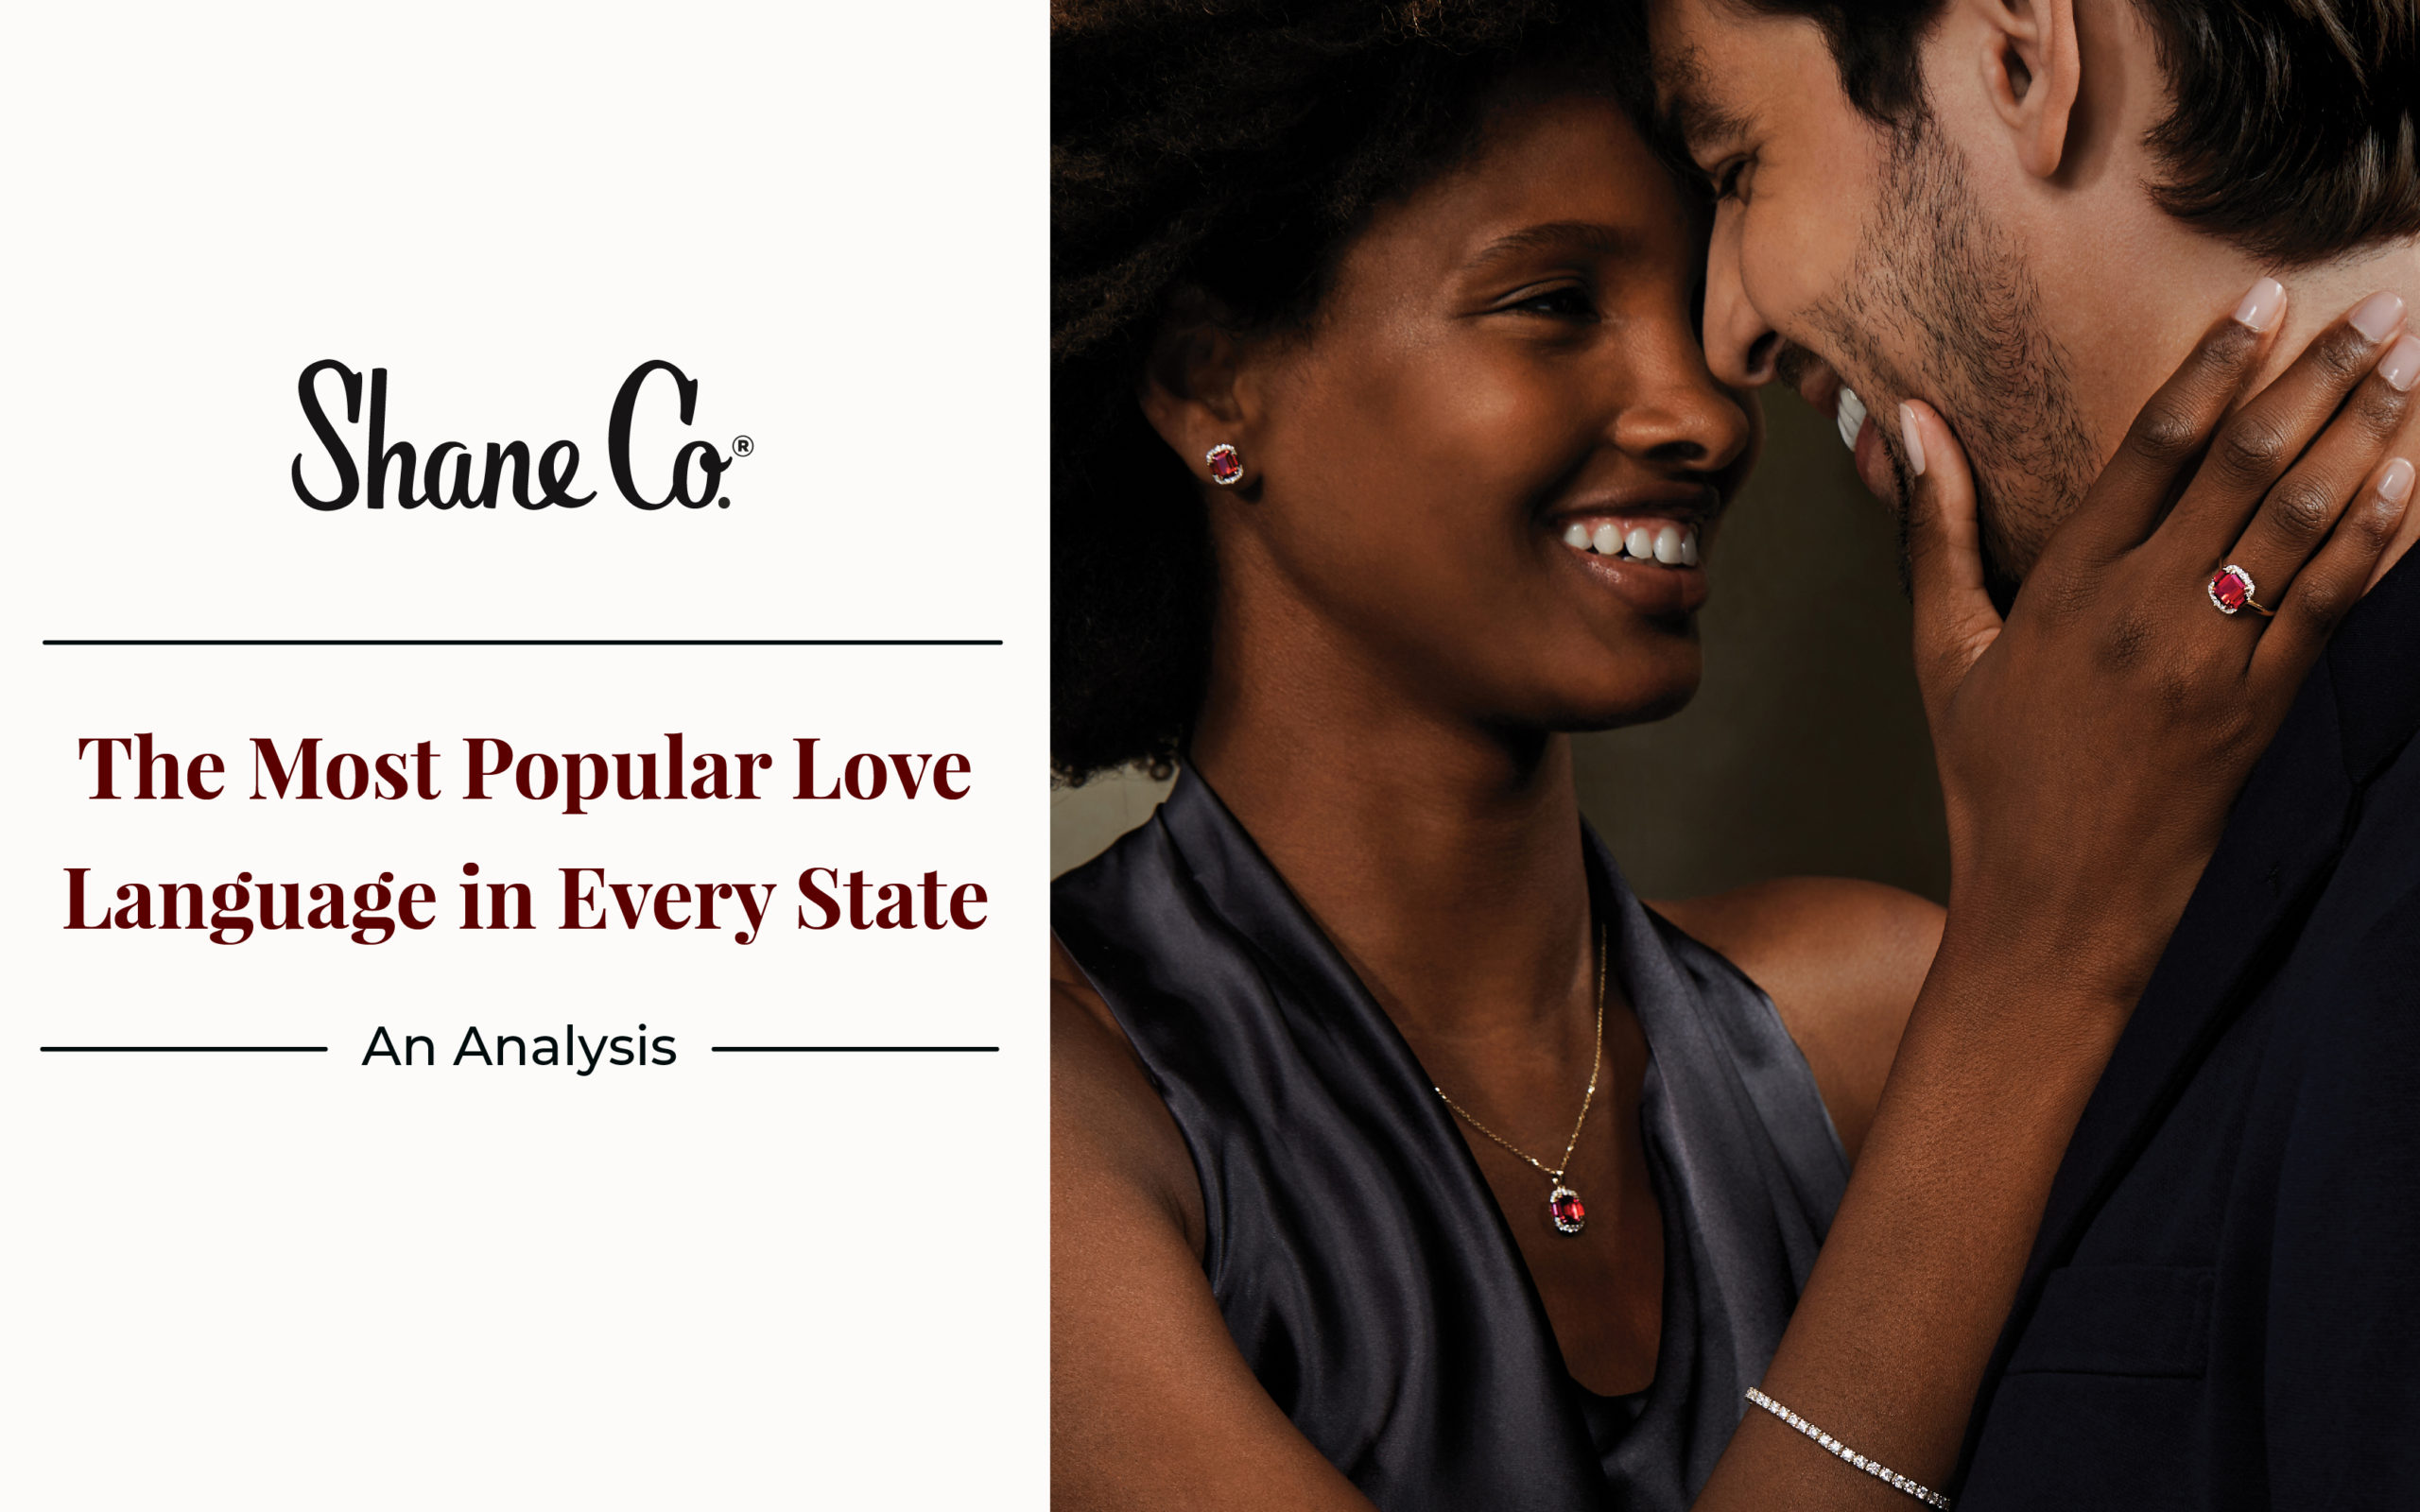 The Most Popular Love Language in Every State